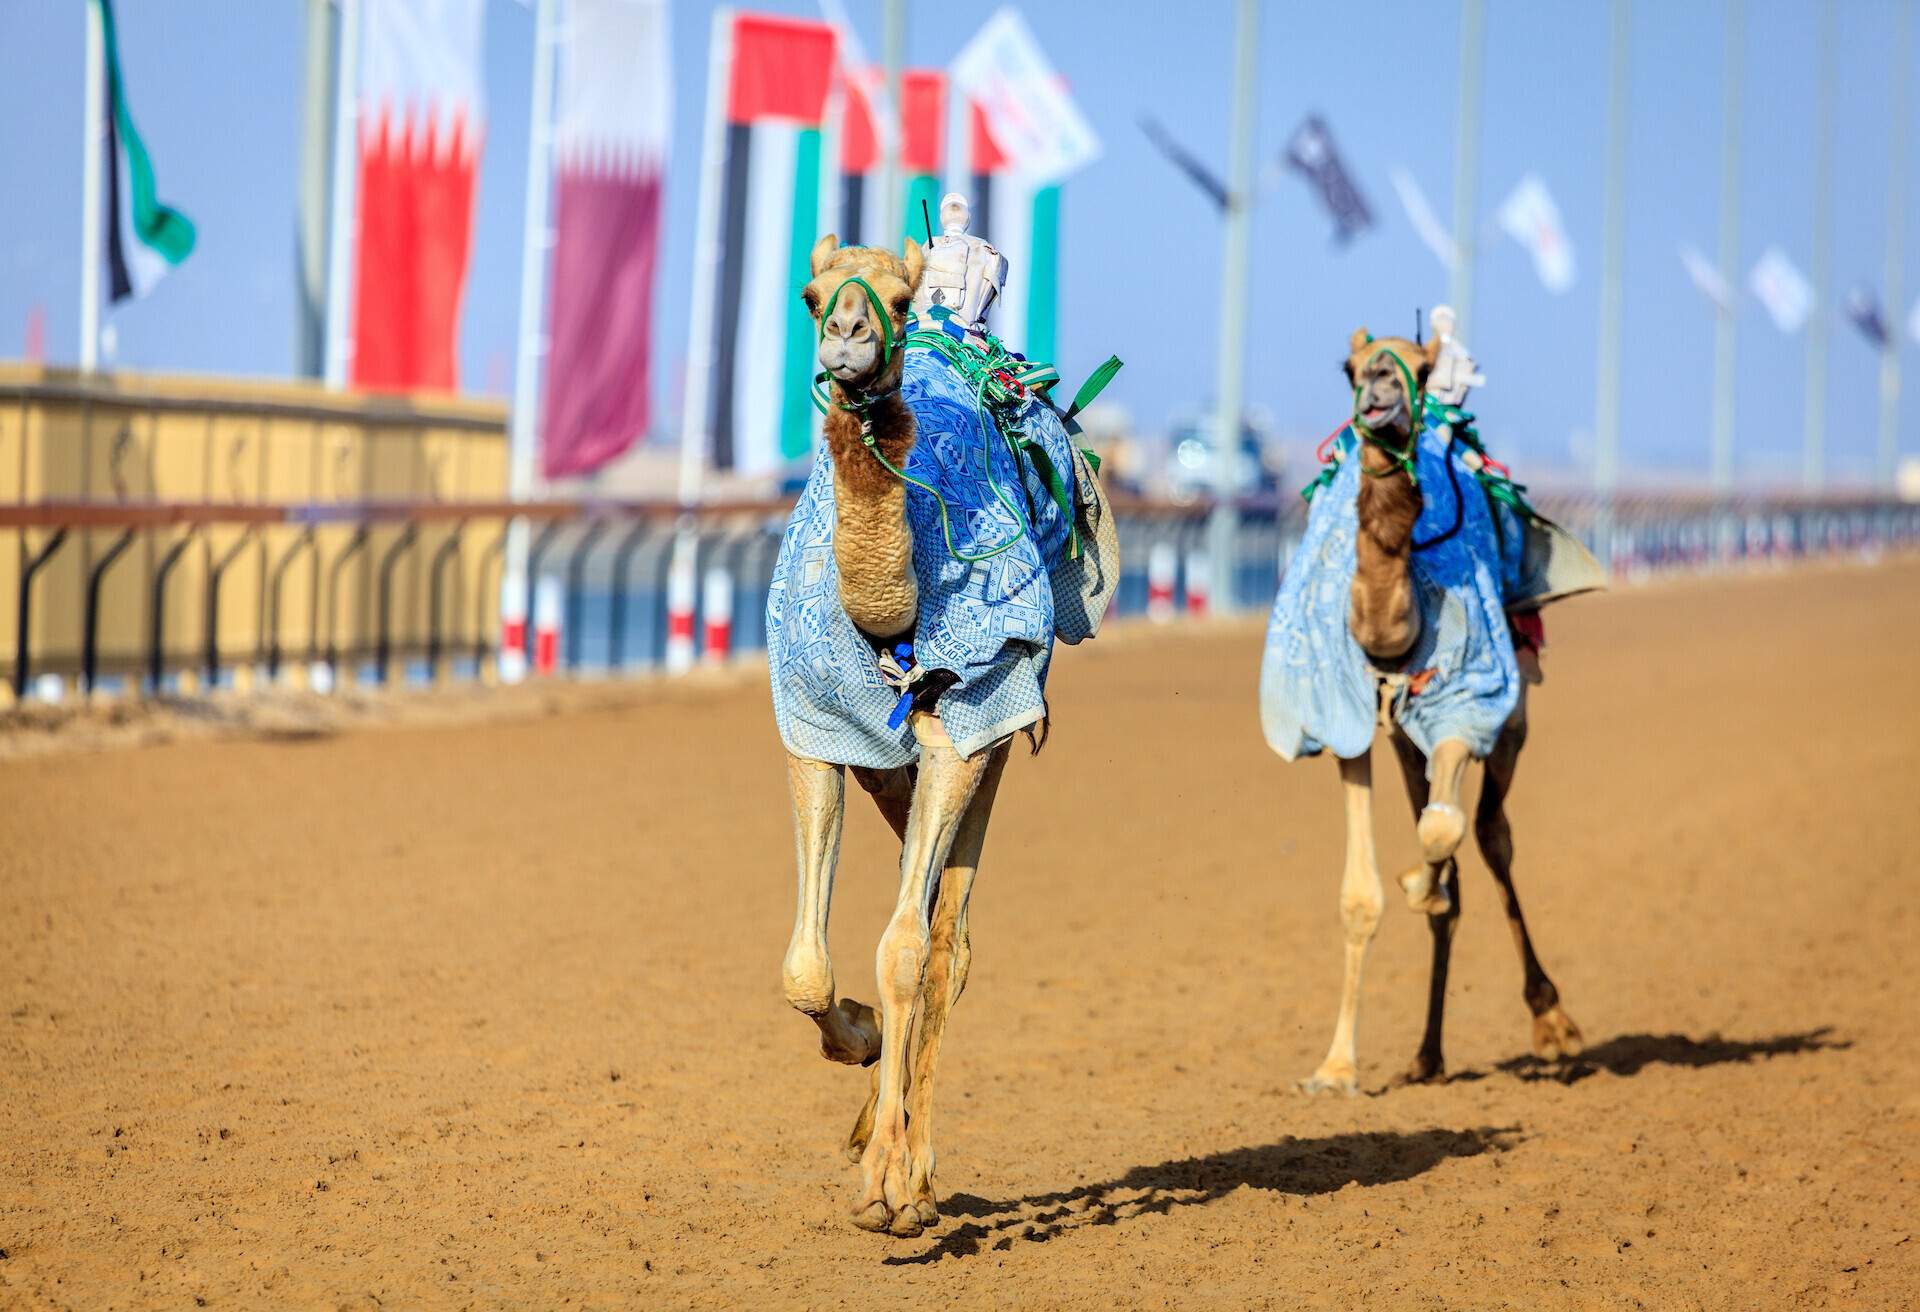 Two camels dressed in blue fabric racing on a race track in Dubai with flags in the background